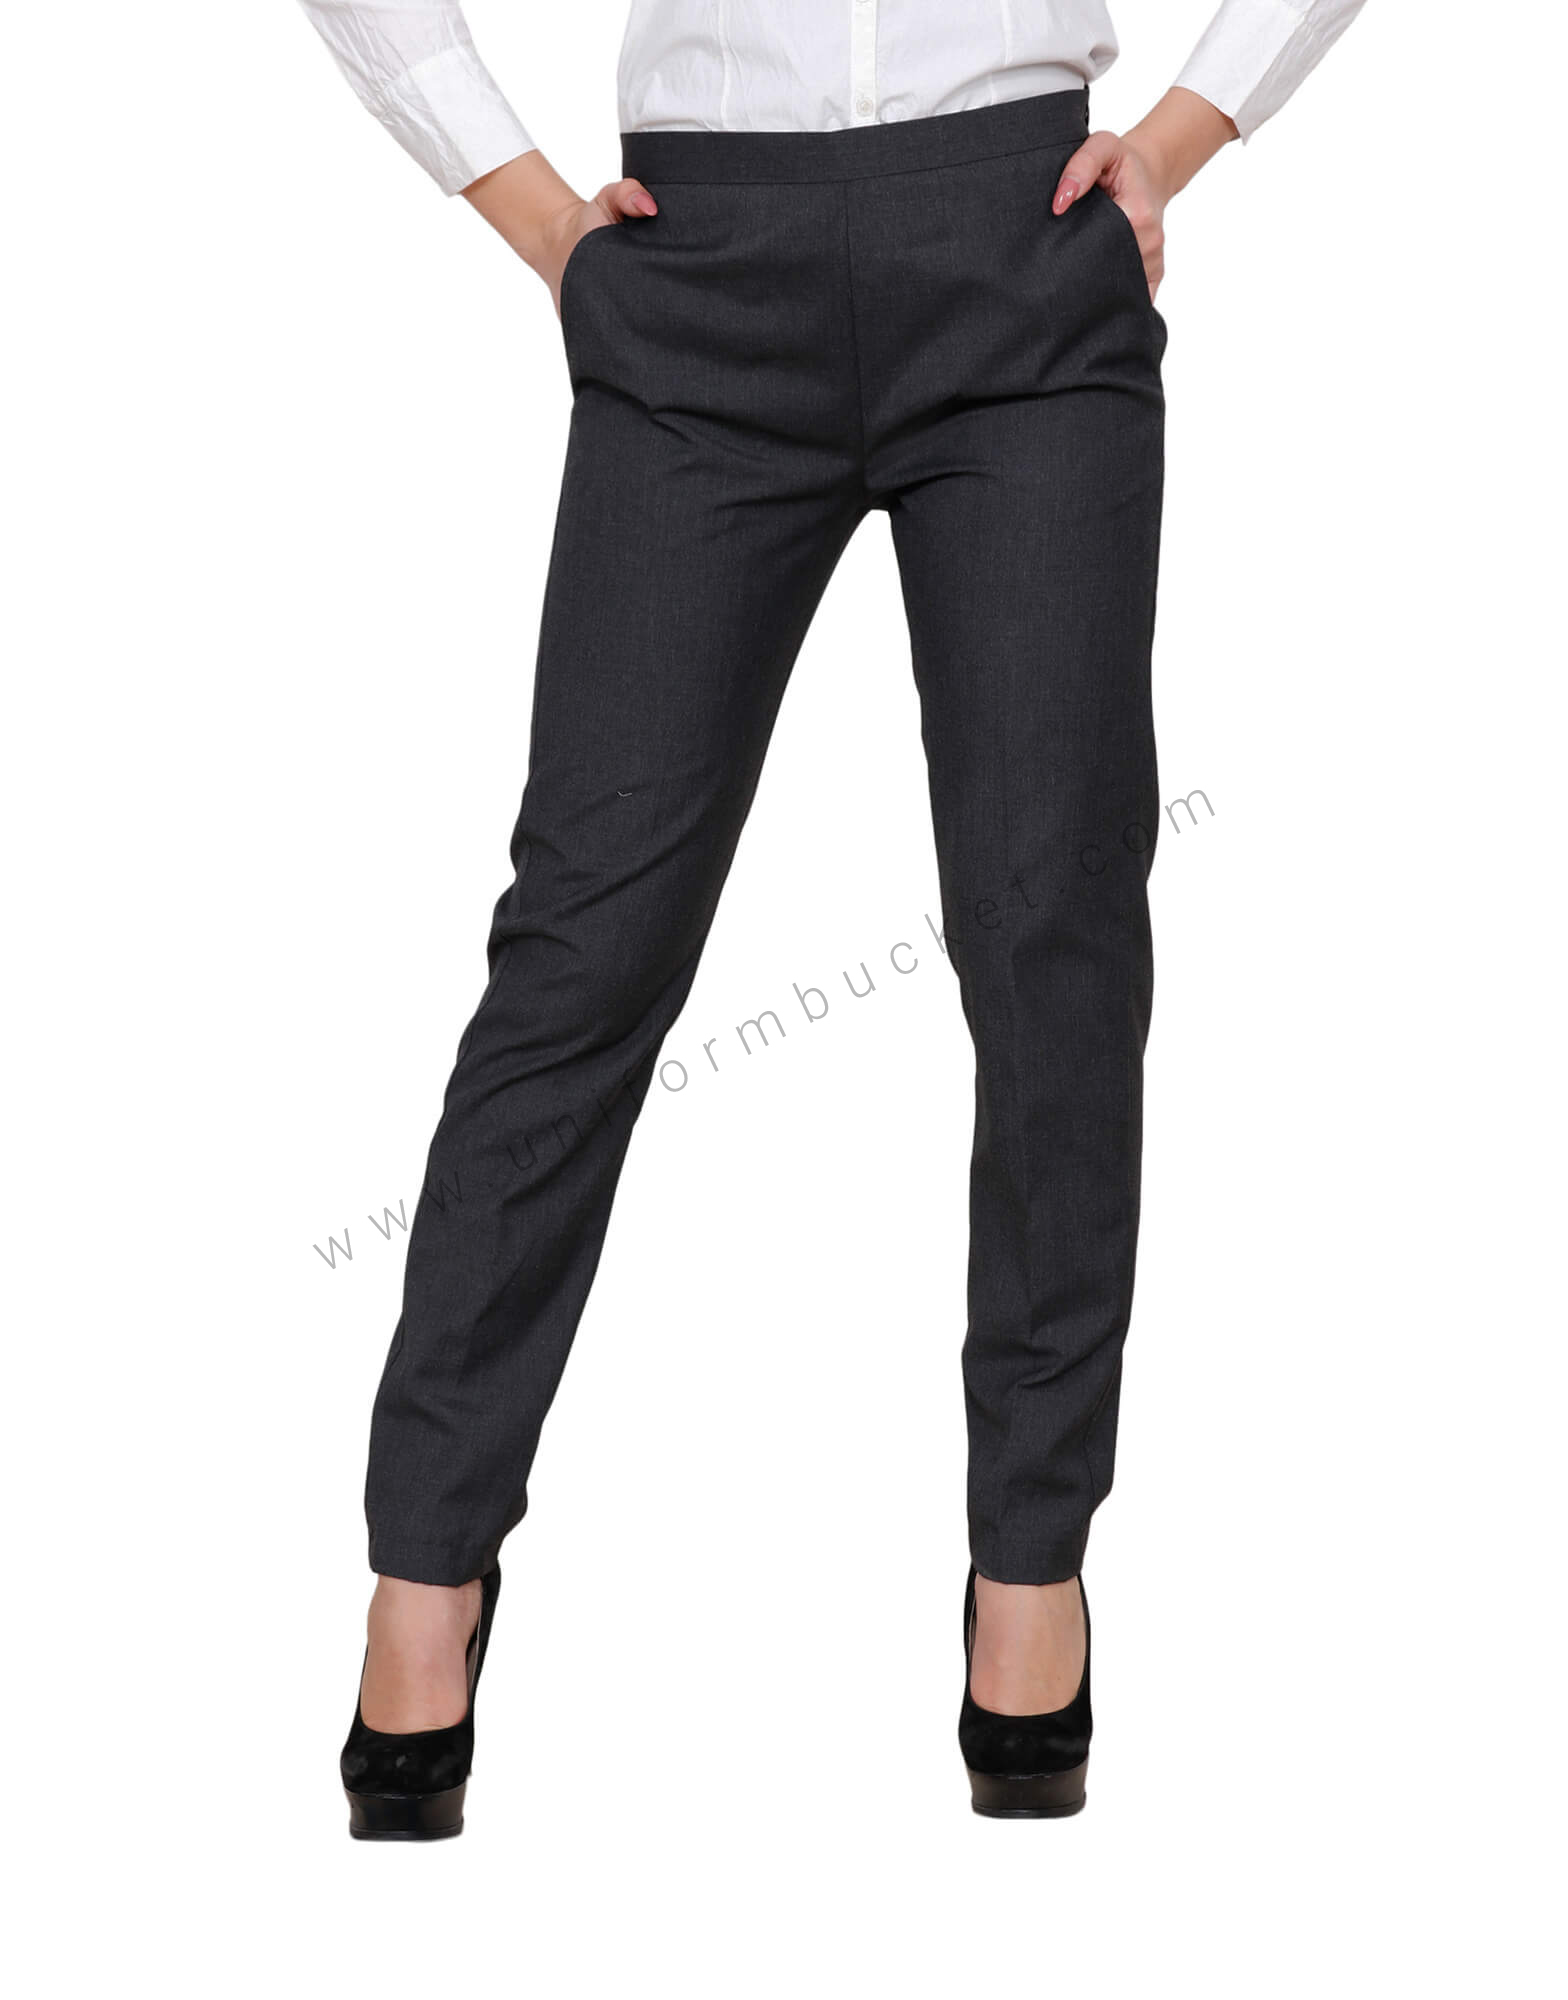 Trouser Pant Worsted Grey Mens Formal Non Pleated  MT103